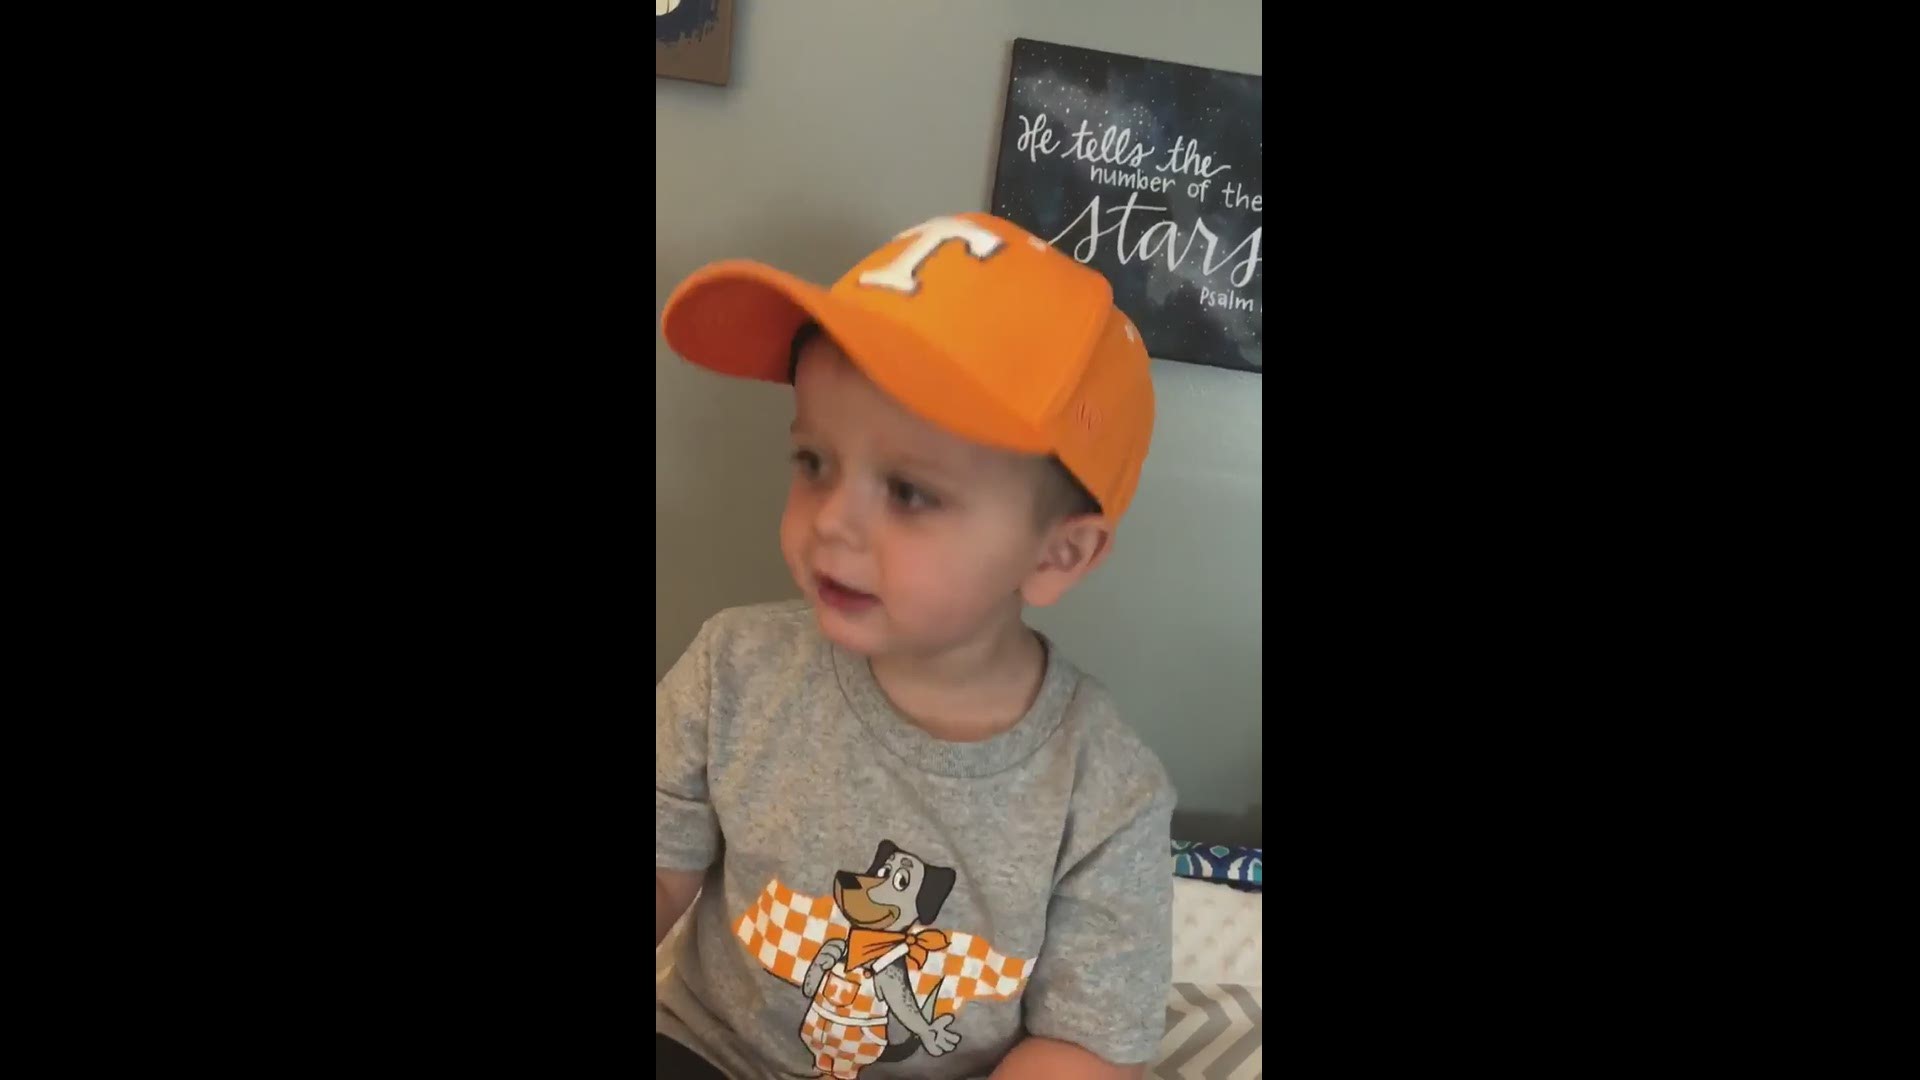 Football time is here in Tennessee and one little fan is showing just how excited he is.